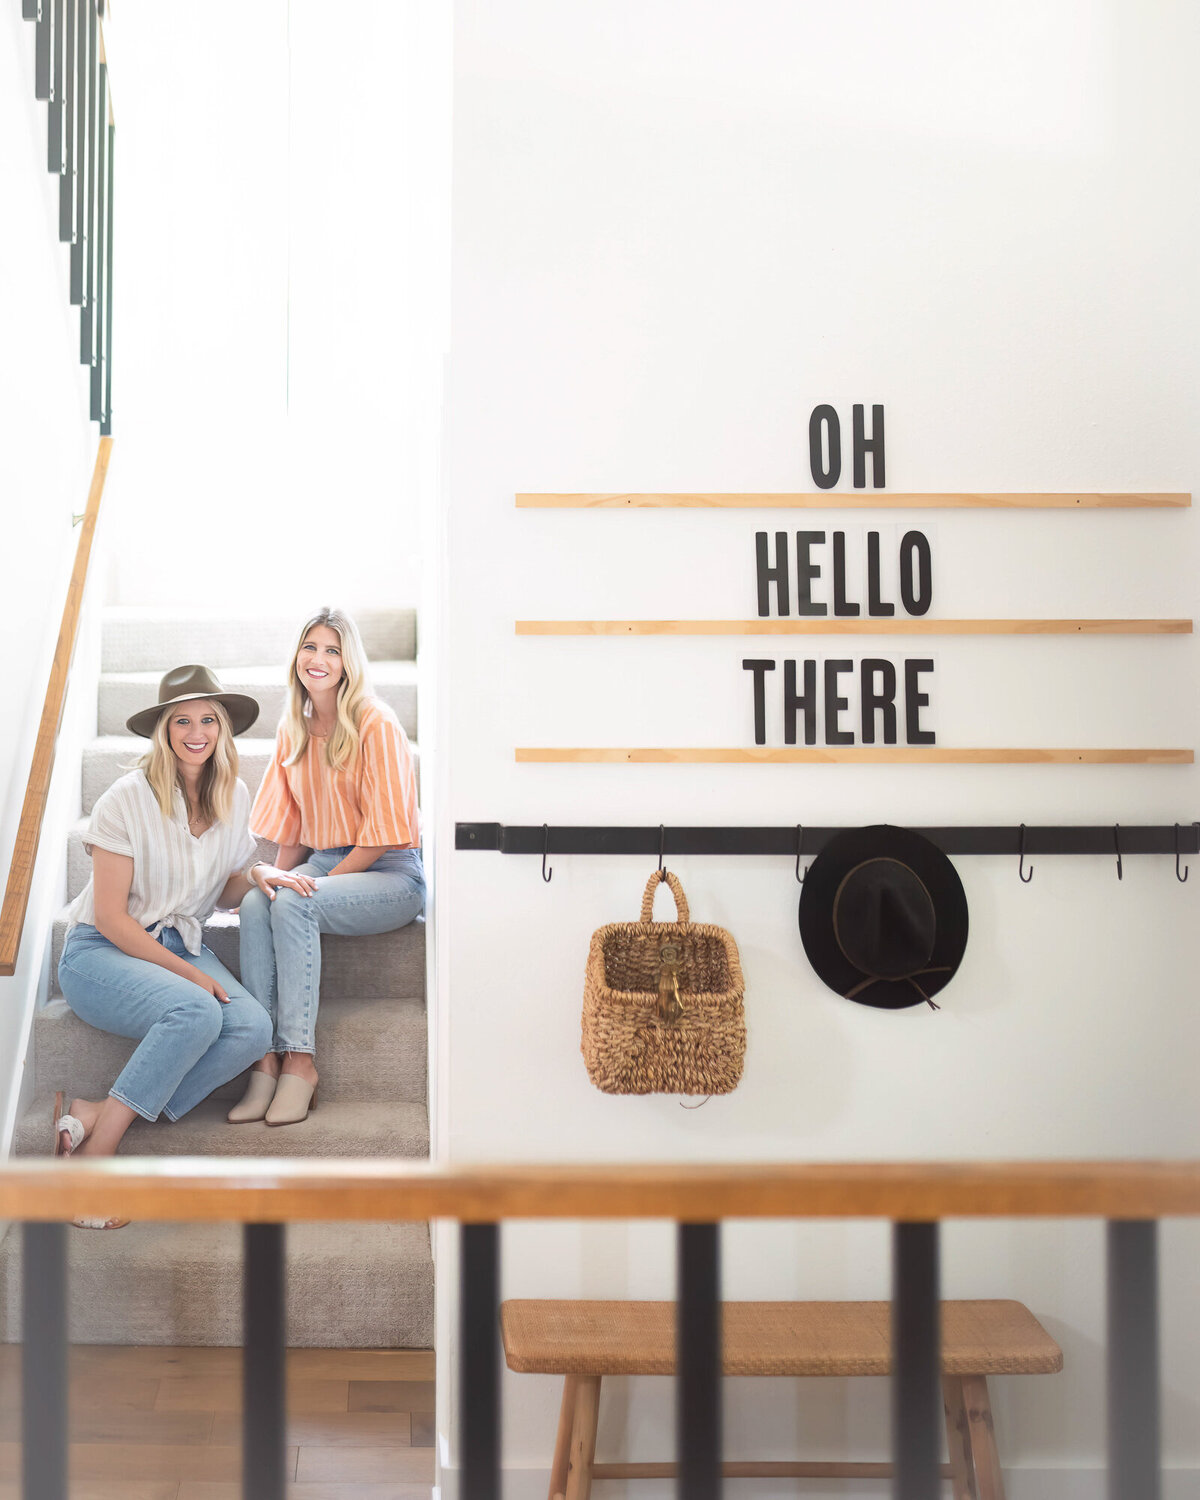 Interior designer sisters sitting on steps, sign on the wall says oh hello there!